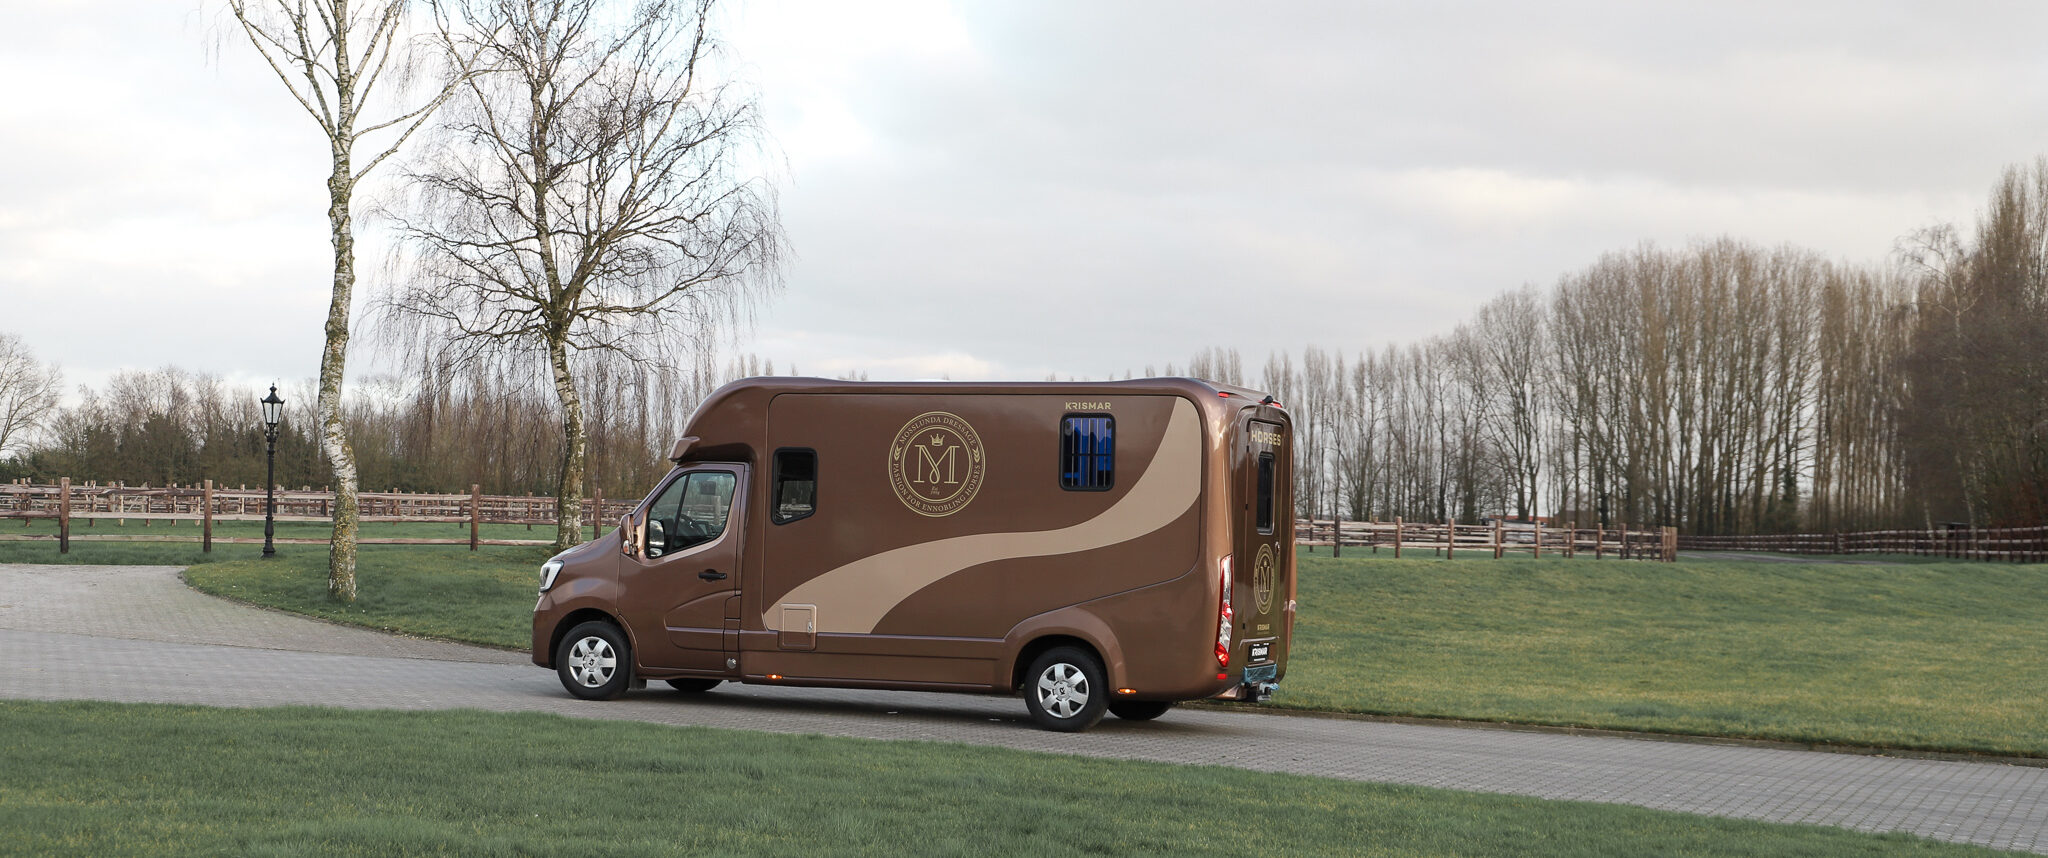 A beautiful Krismar 2-horse in a brown color with the Swedish customer's logo on it.